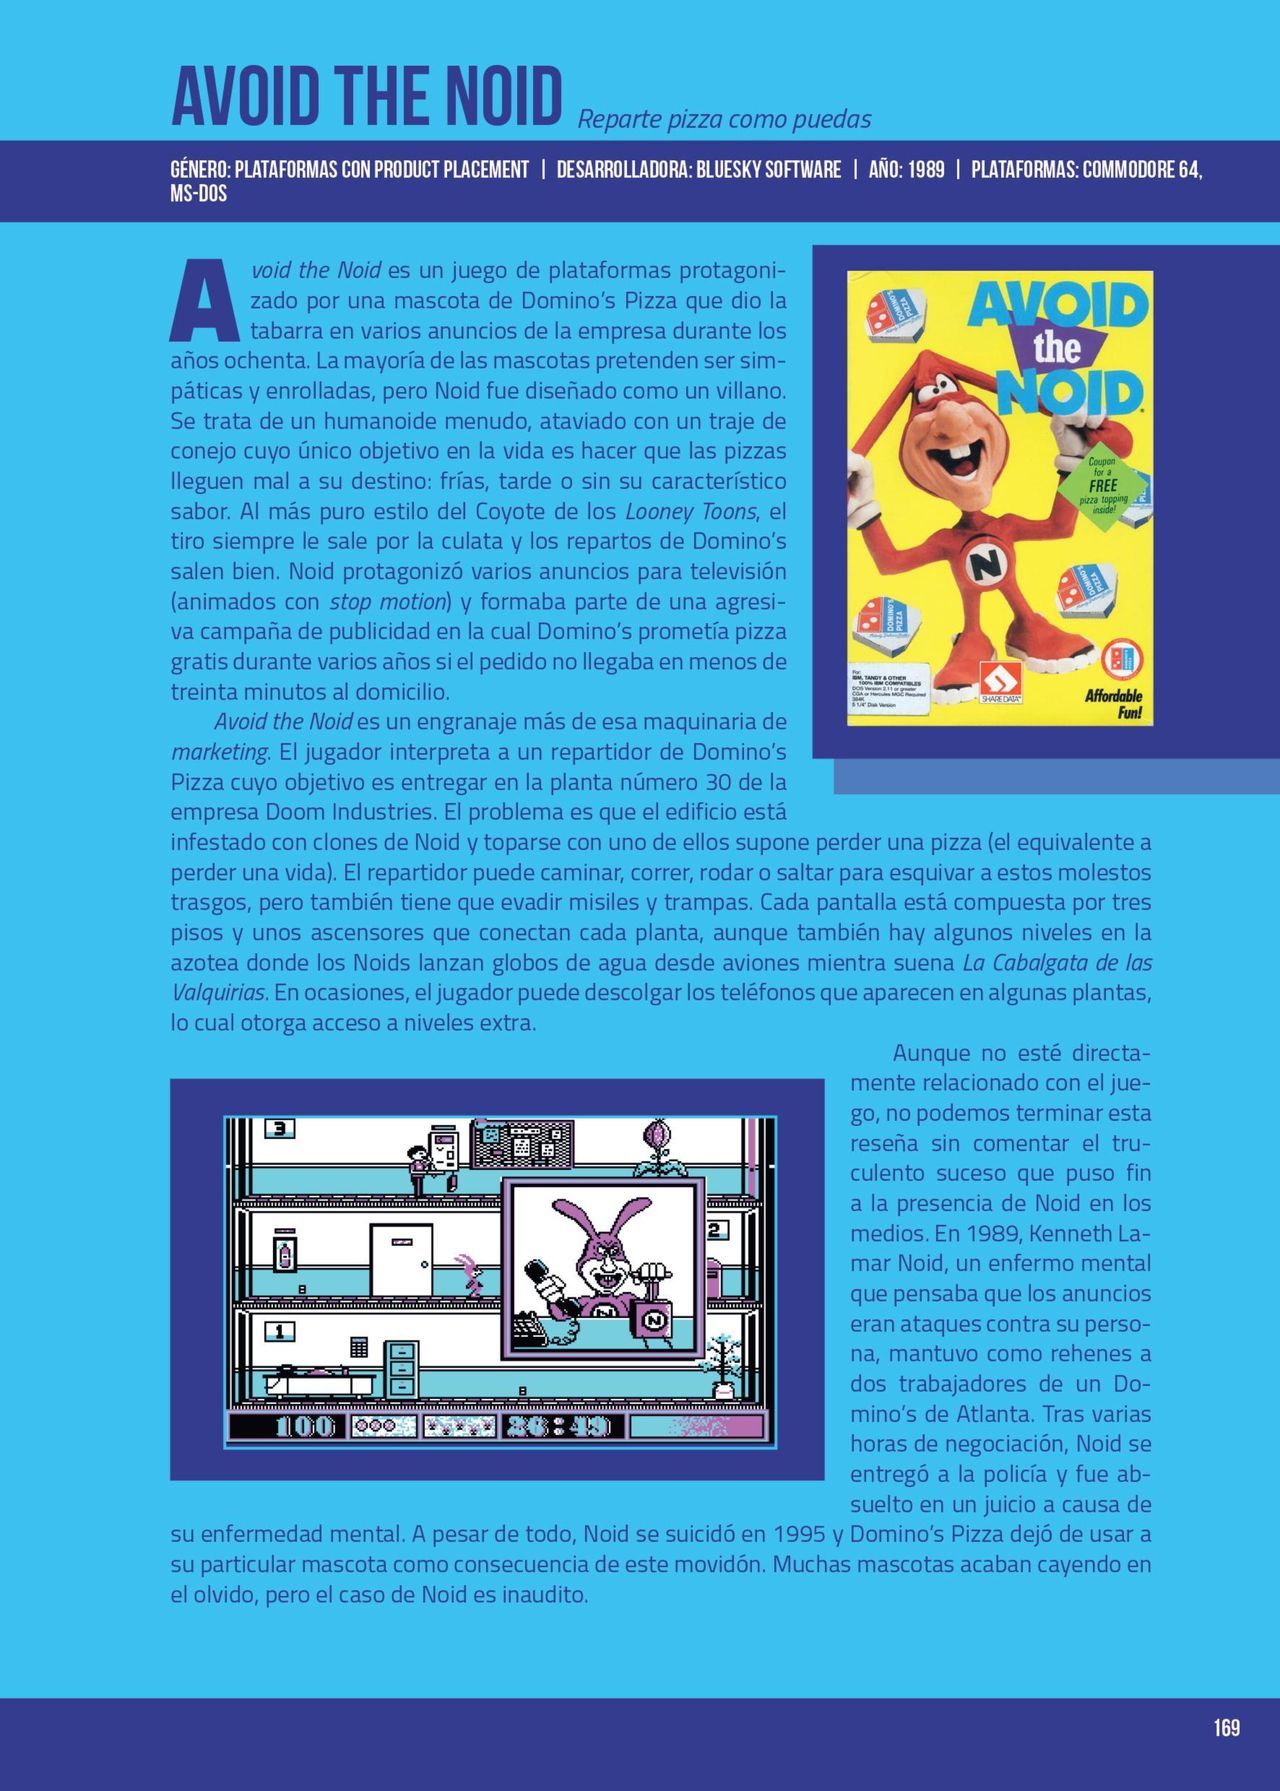 now available the Guide Damn of video games, the Ludonomicón